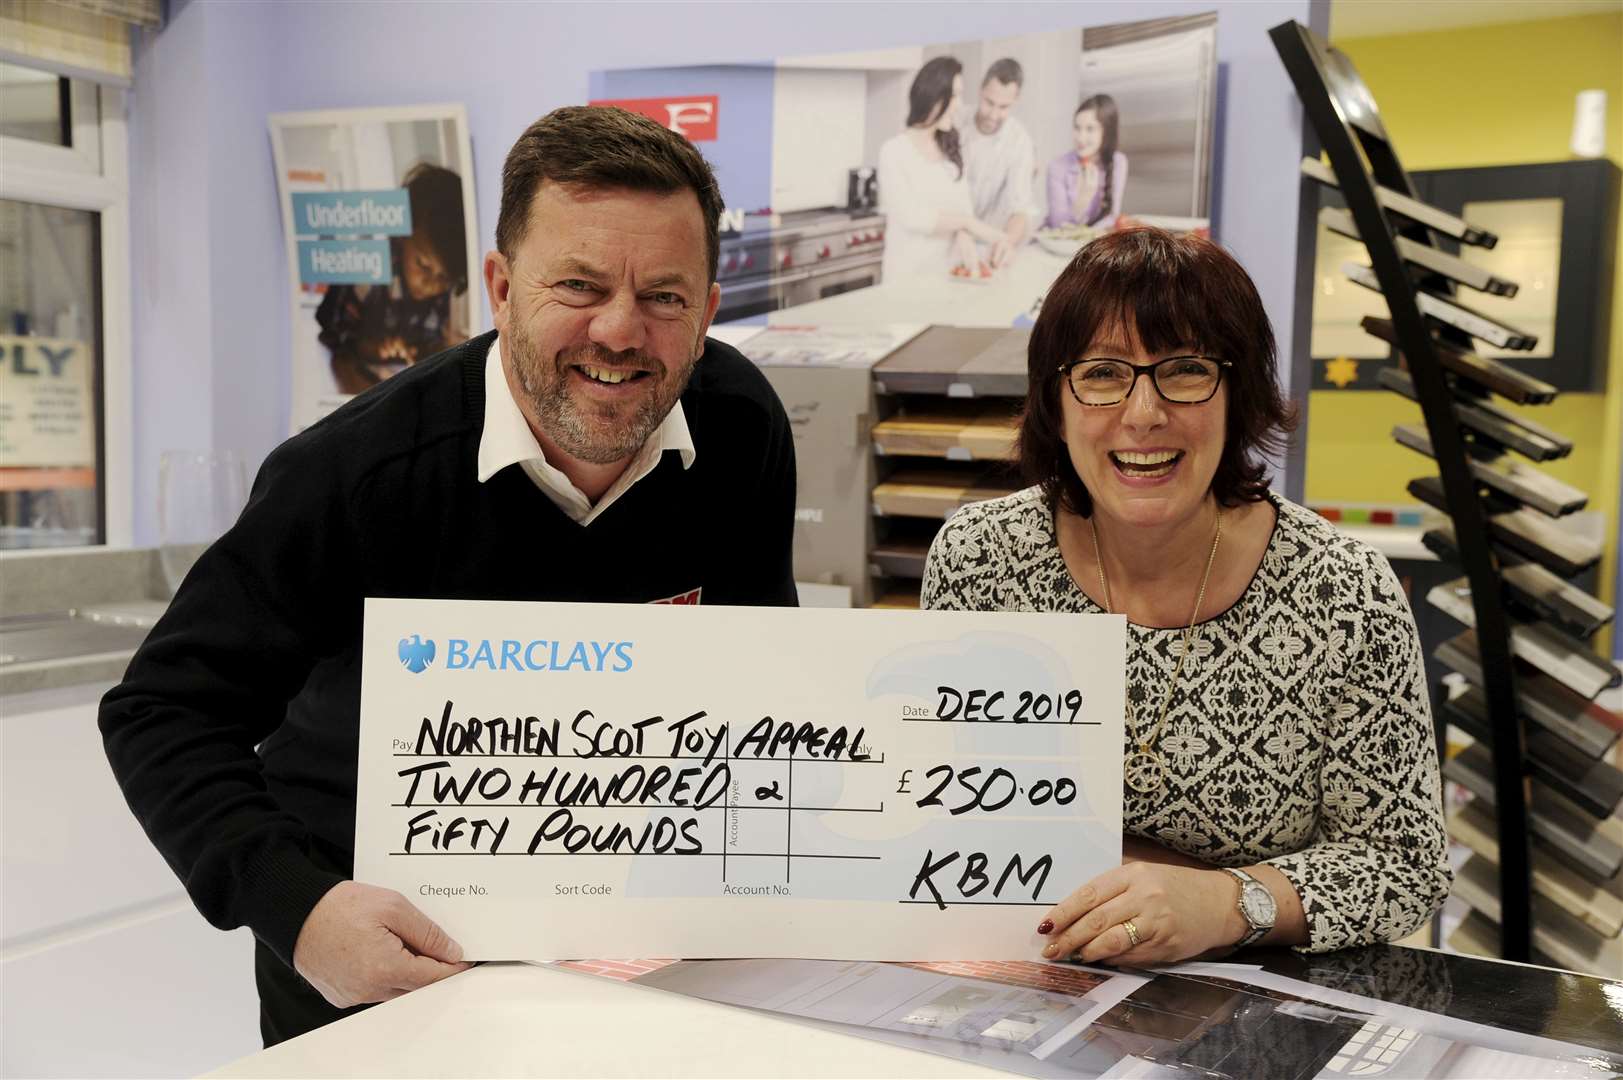 Keith Builders Merchants managing director Jeff Smith hands over a cheque for £250 for the Toy Appeal to Nicola McCart, senior accounts manager at the Northern Scot. Picture: Eric Cormack